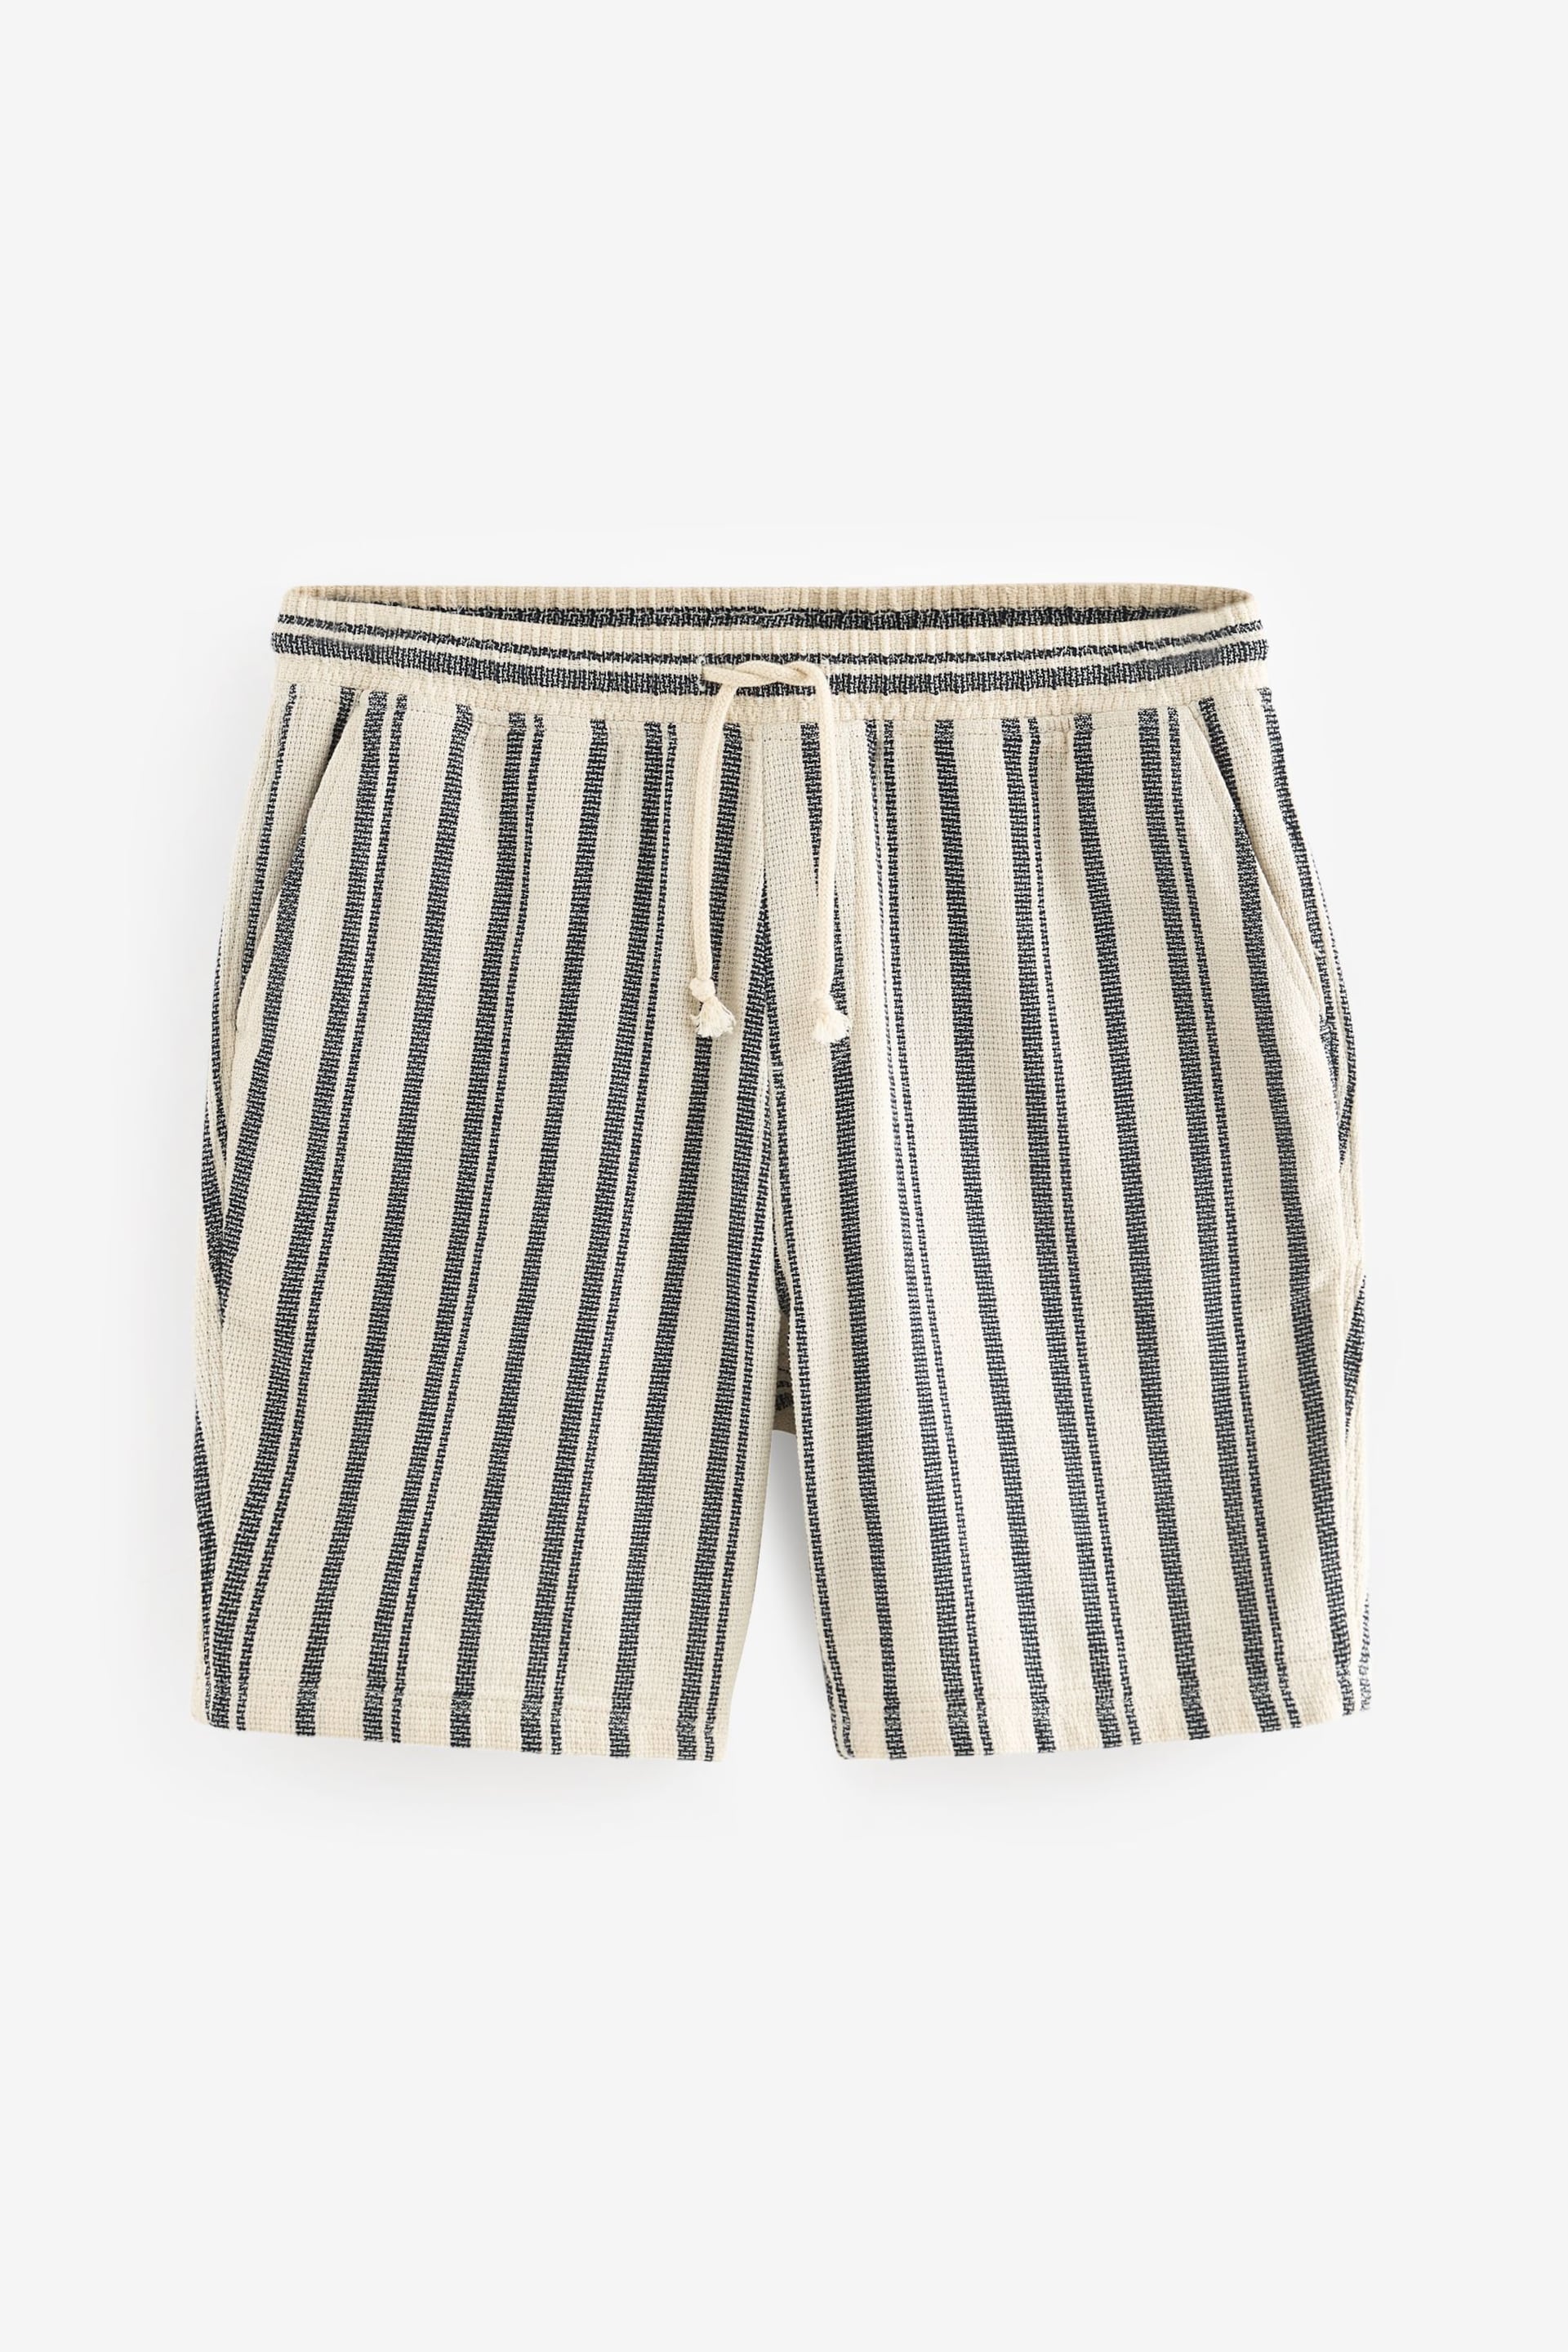 Cream/Blue Striped Textured Dock Shorts - Image 5 of 8